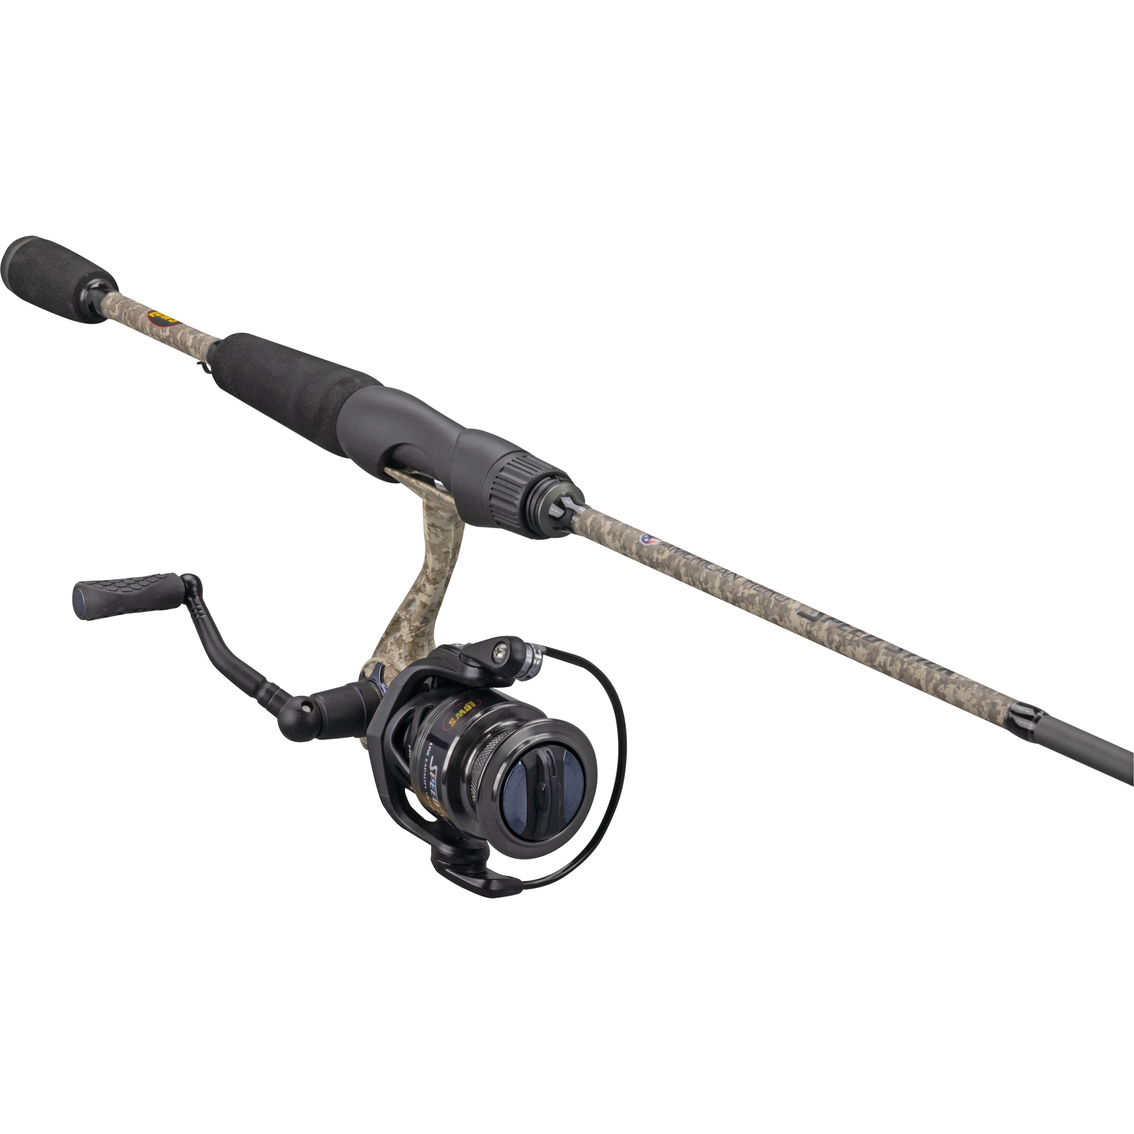 Lew's American Hero Camo Speed Spin Rod and Reel Combo IM7 - Image 2 of 6